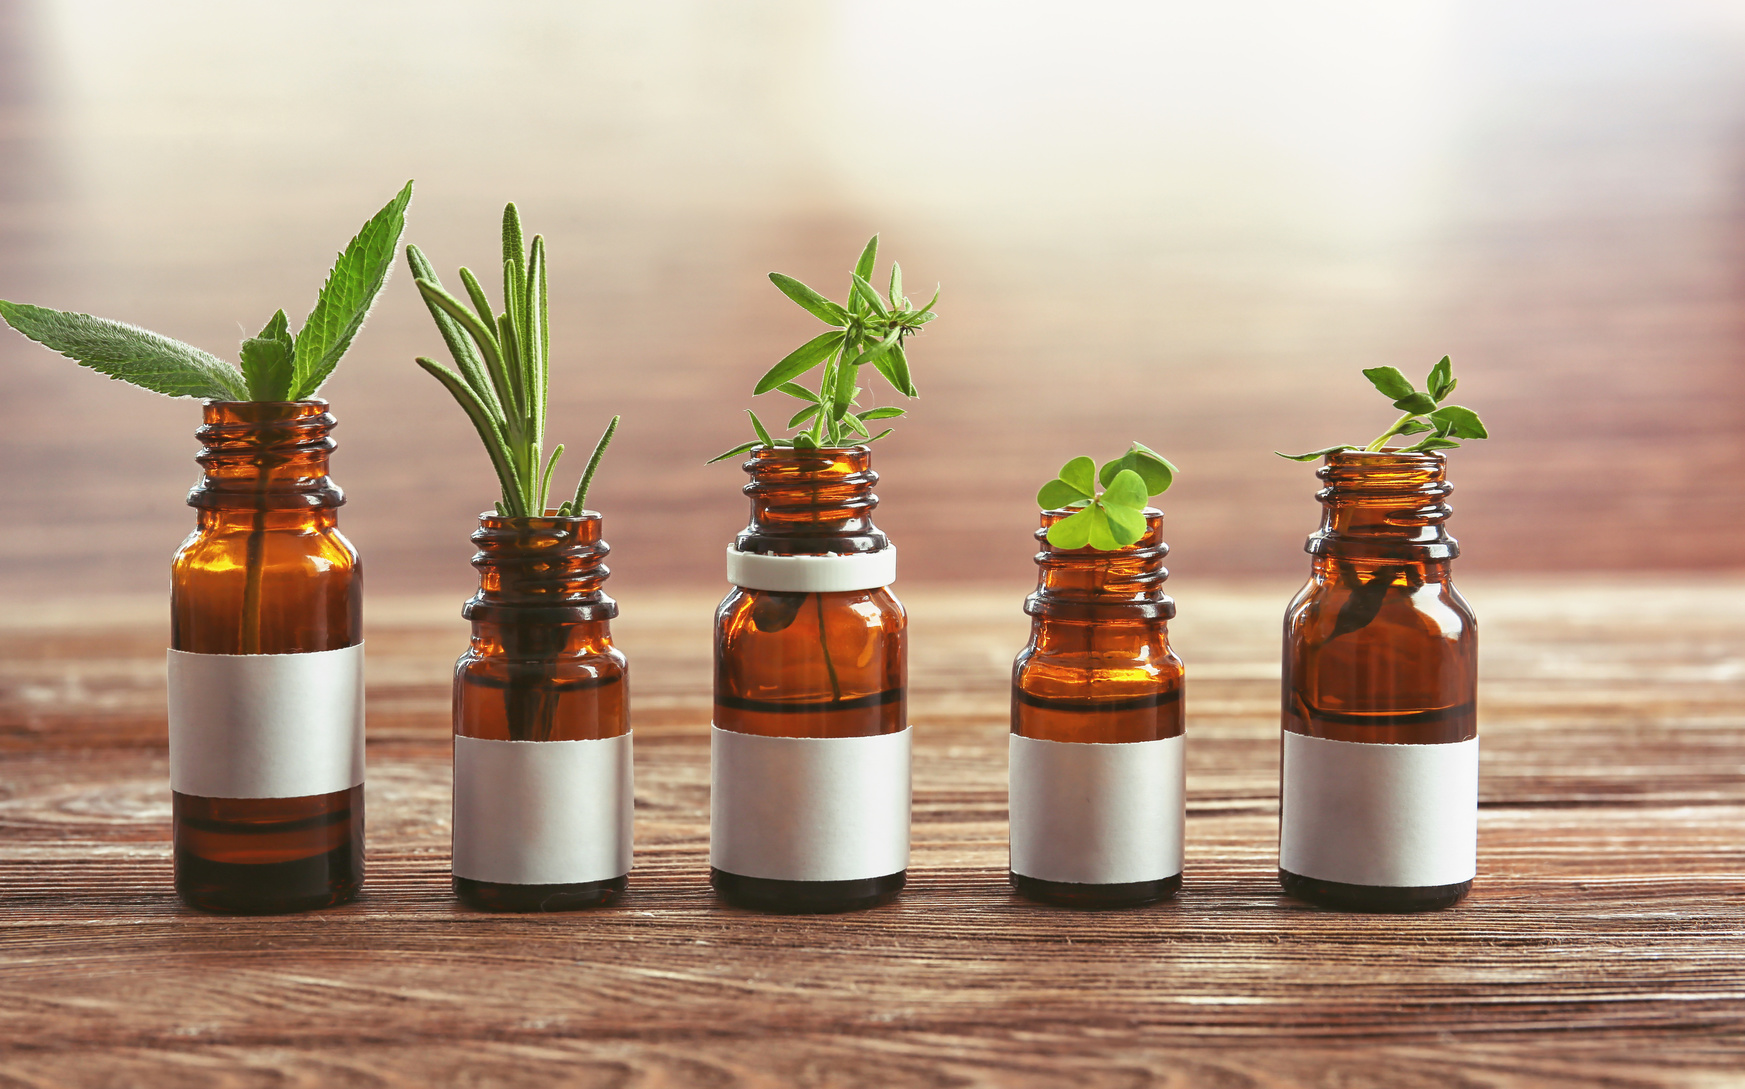 Dropper bottles and herbs on wooden table